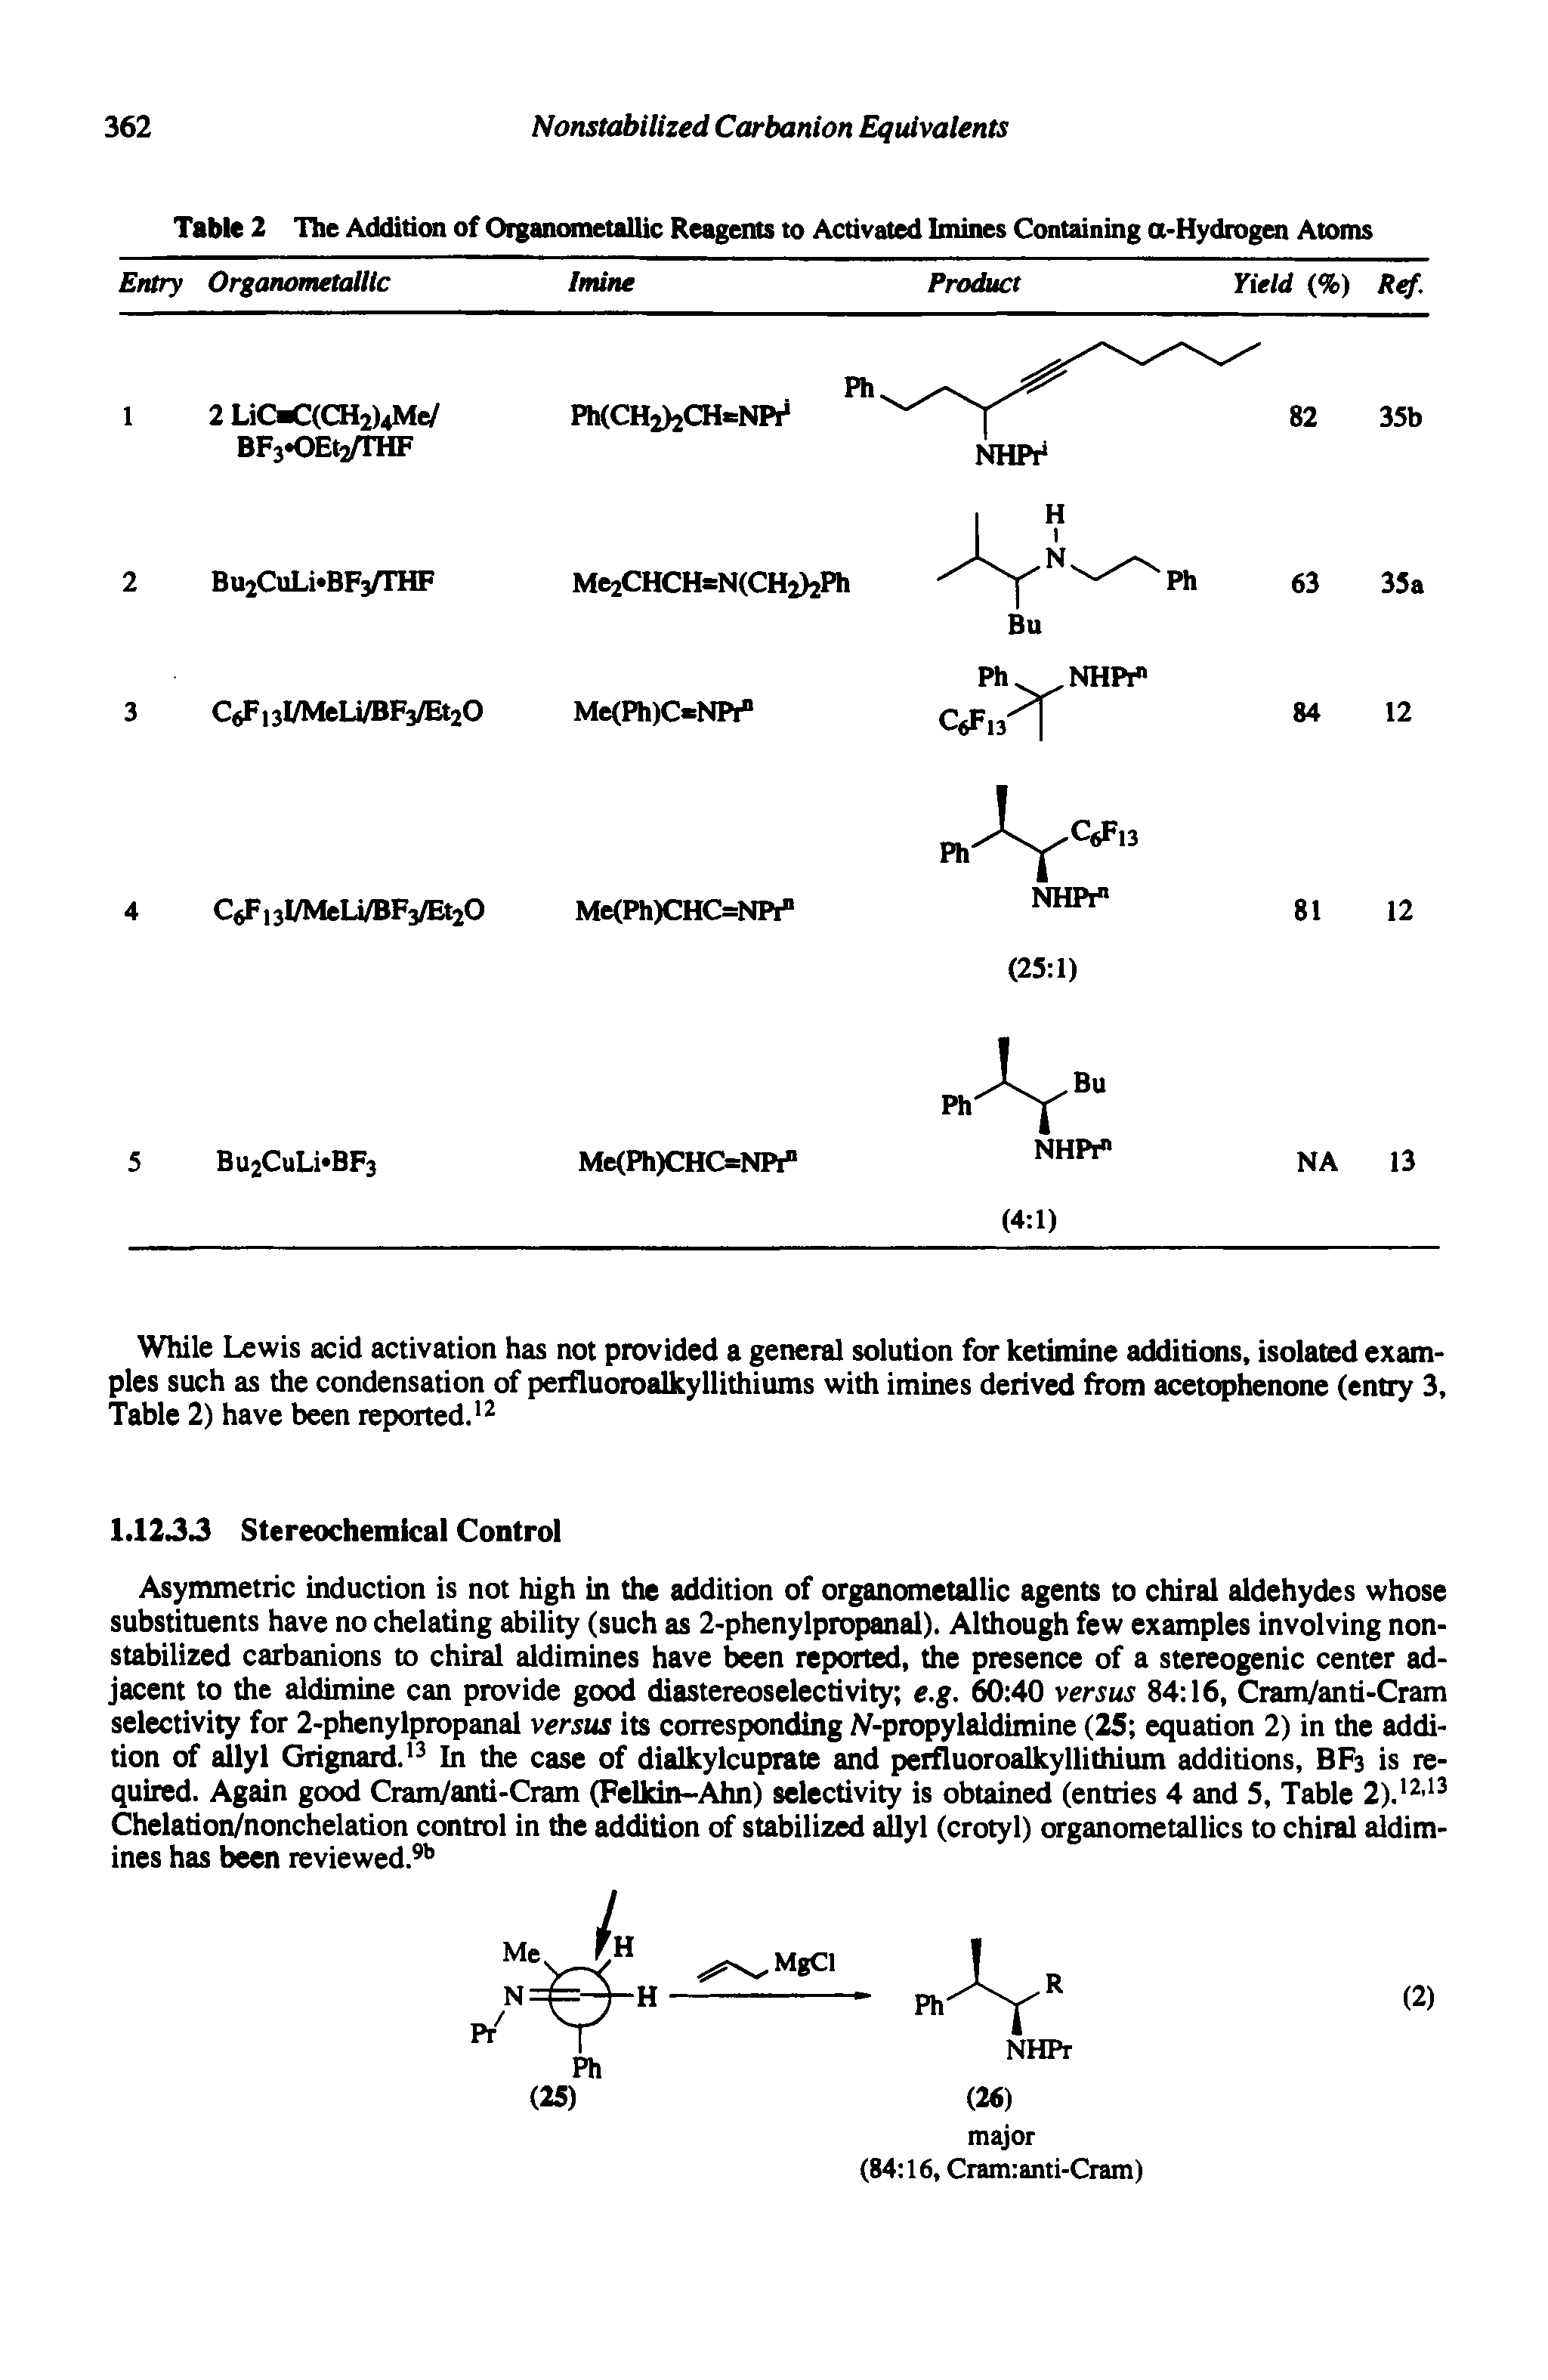 Table 2 The Addition of Organometallic Reagents to Activated Imines Containing a-Hydrogen Atoms...